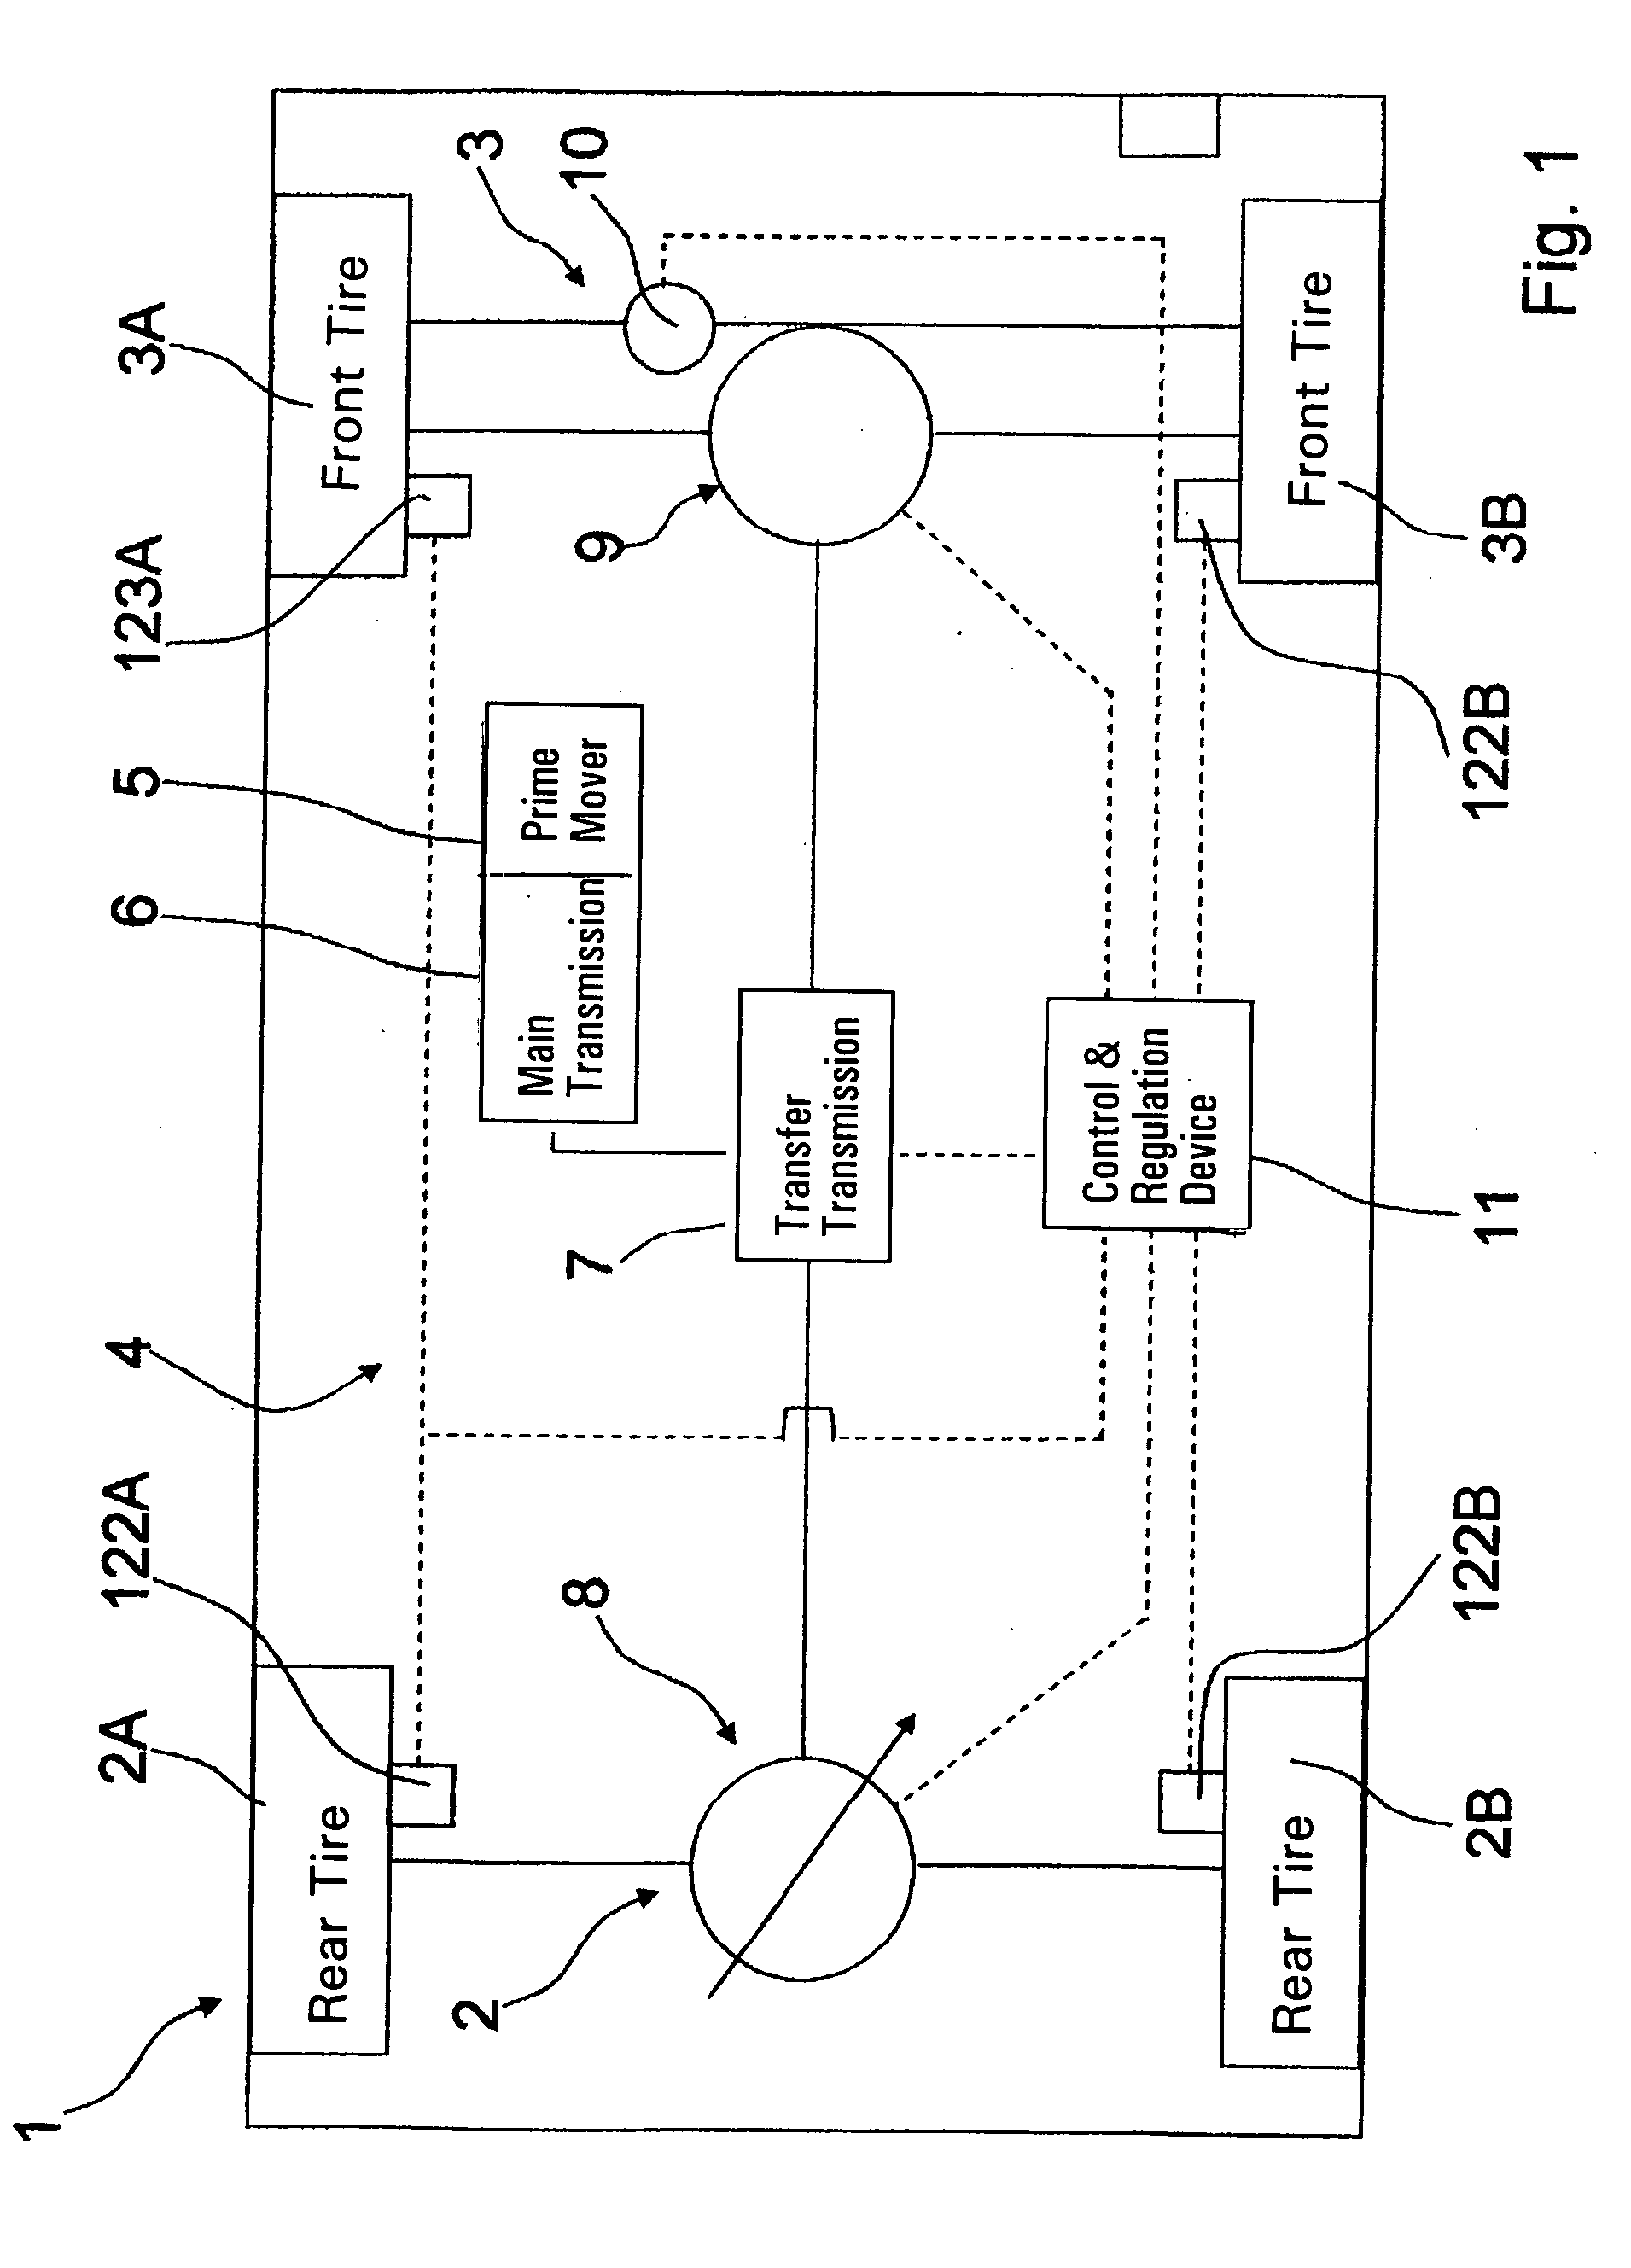 Method for determining a control standard of an active vehicle steering device controllable by a control device